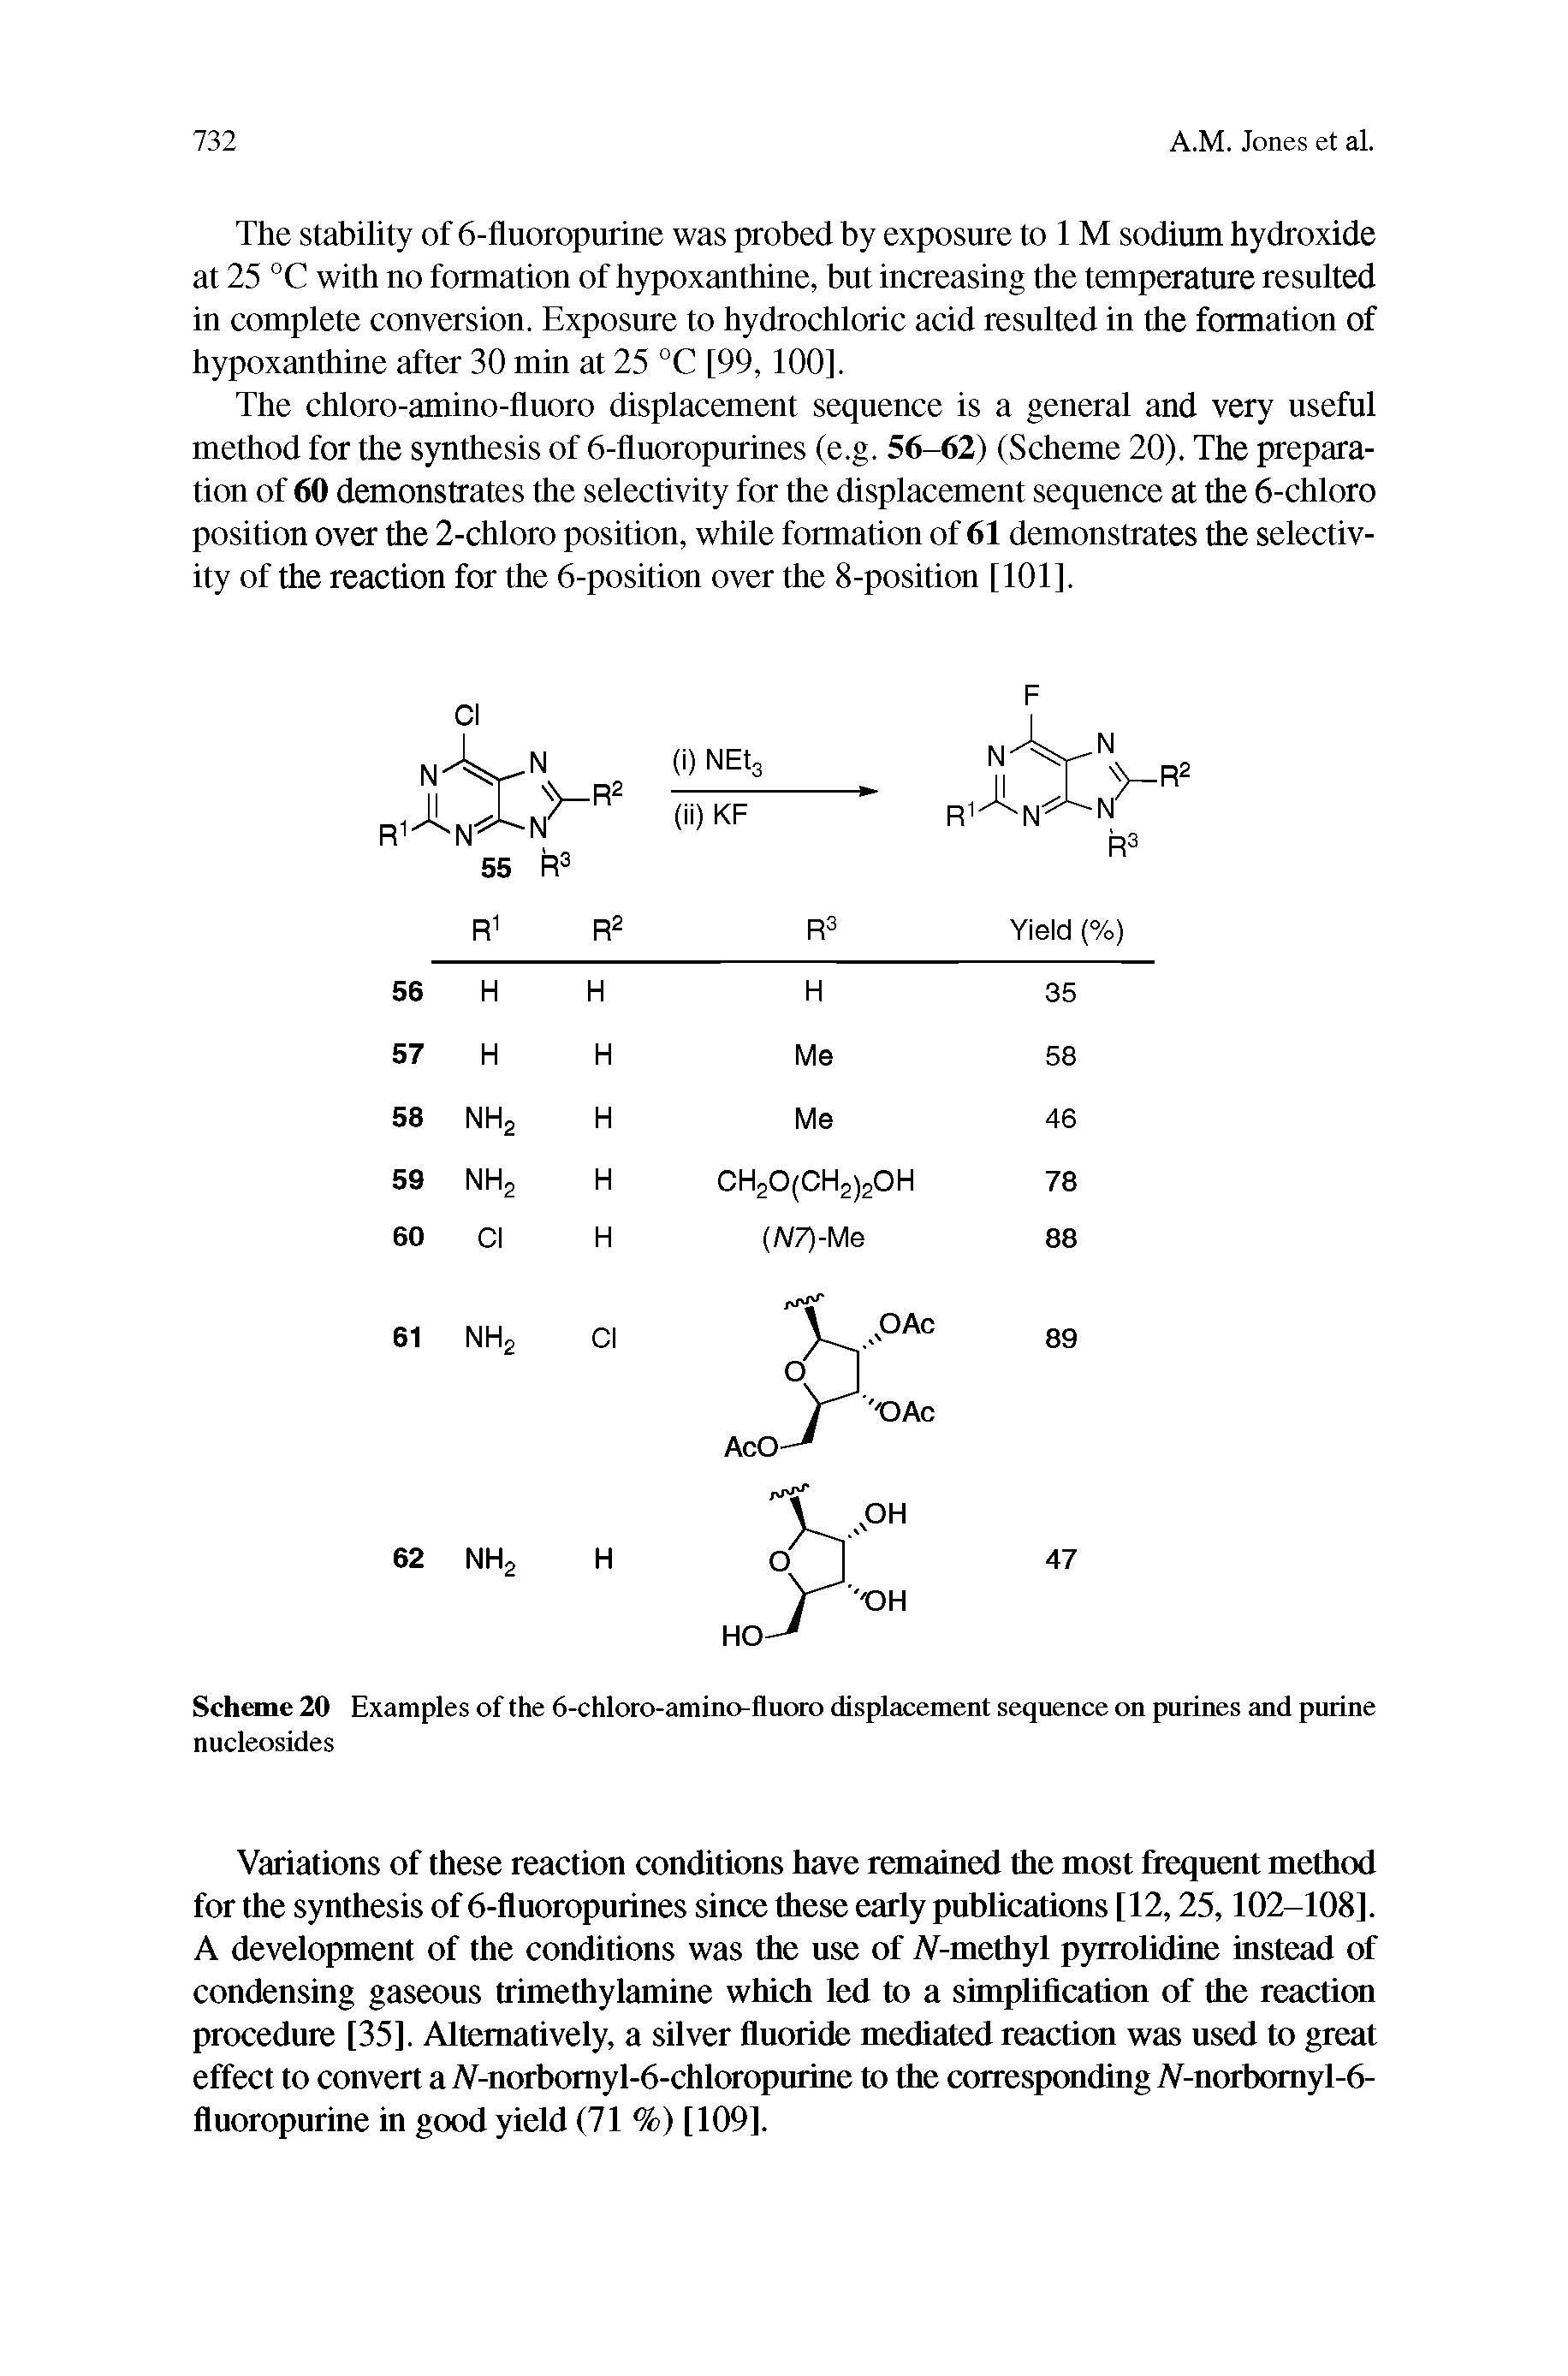 Scheme 20 Examples of the 6-chloro-amino-fluoro displacement sequence on purines and purine nucleosides...